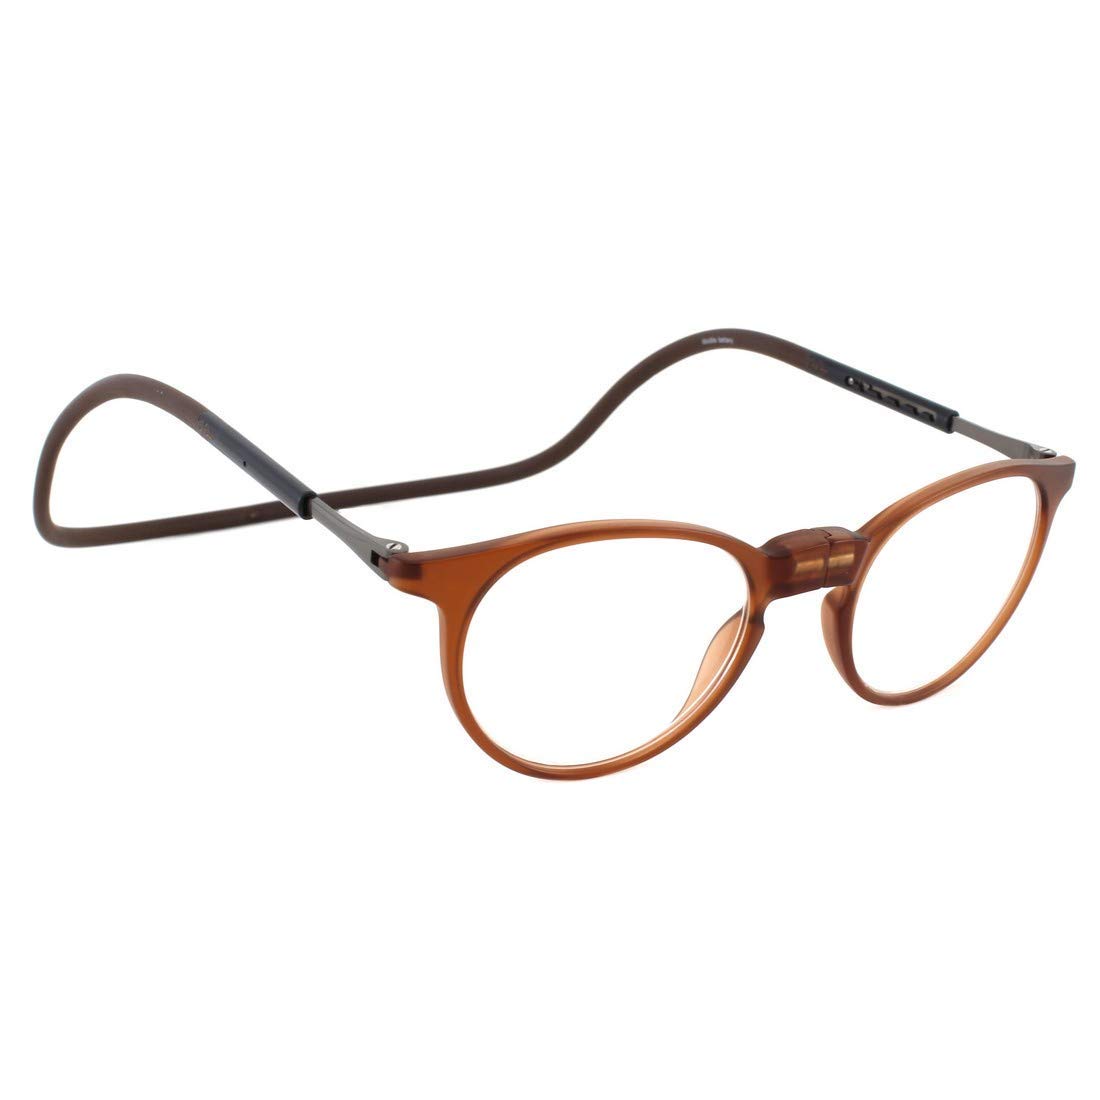 Round Magnetic Easyflex Reading Spectacle Glasses Suitable For Near Vision Color Brown